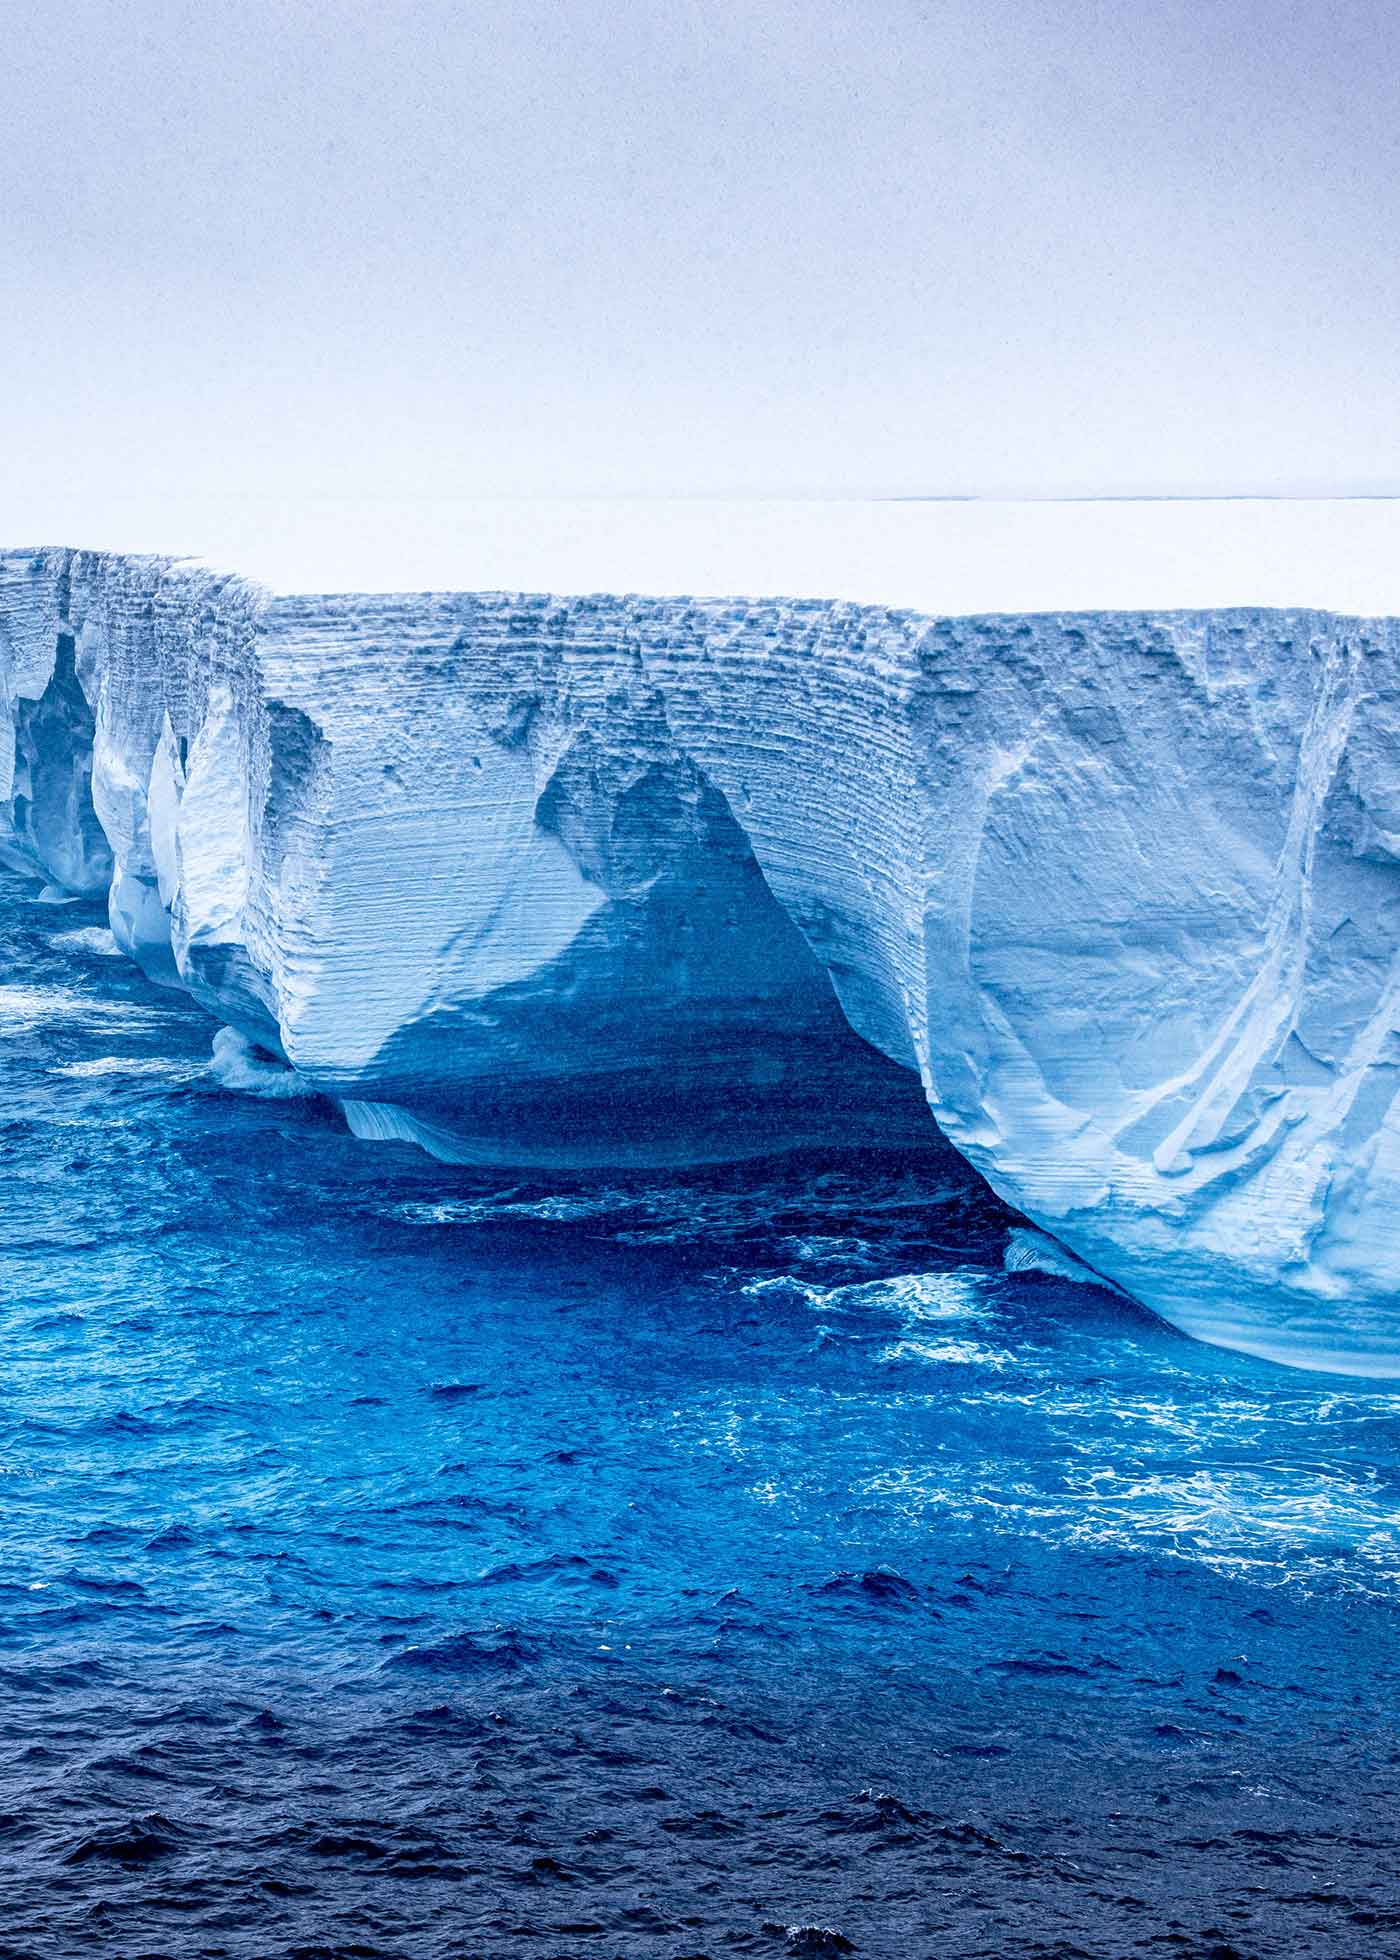 A23a: Tracking the world's biggest iceberg as it drifts towards oblivion